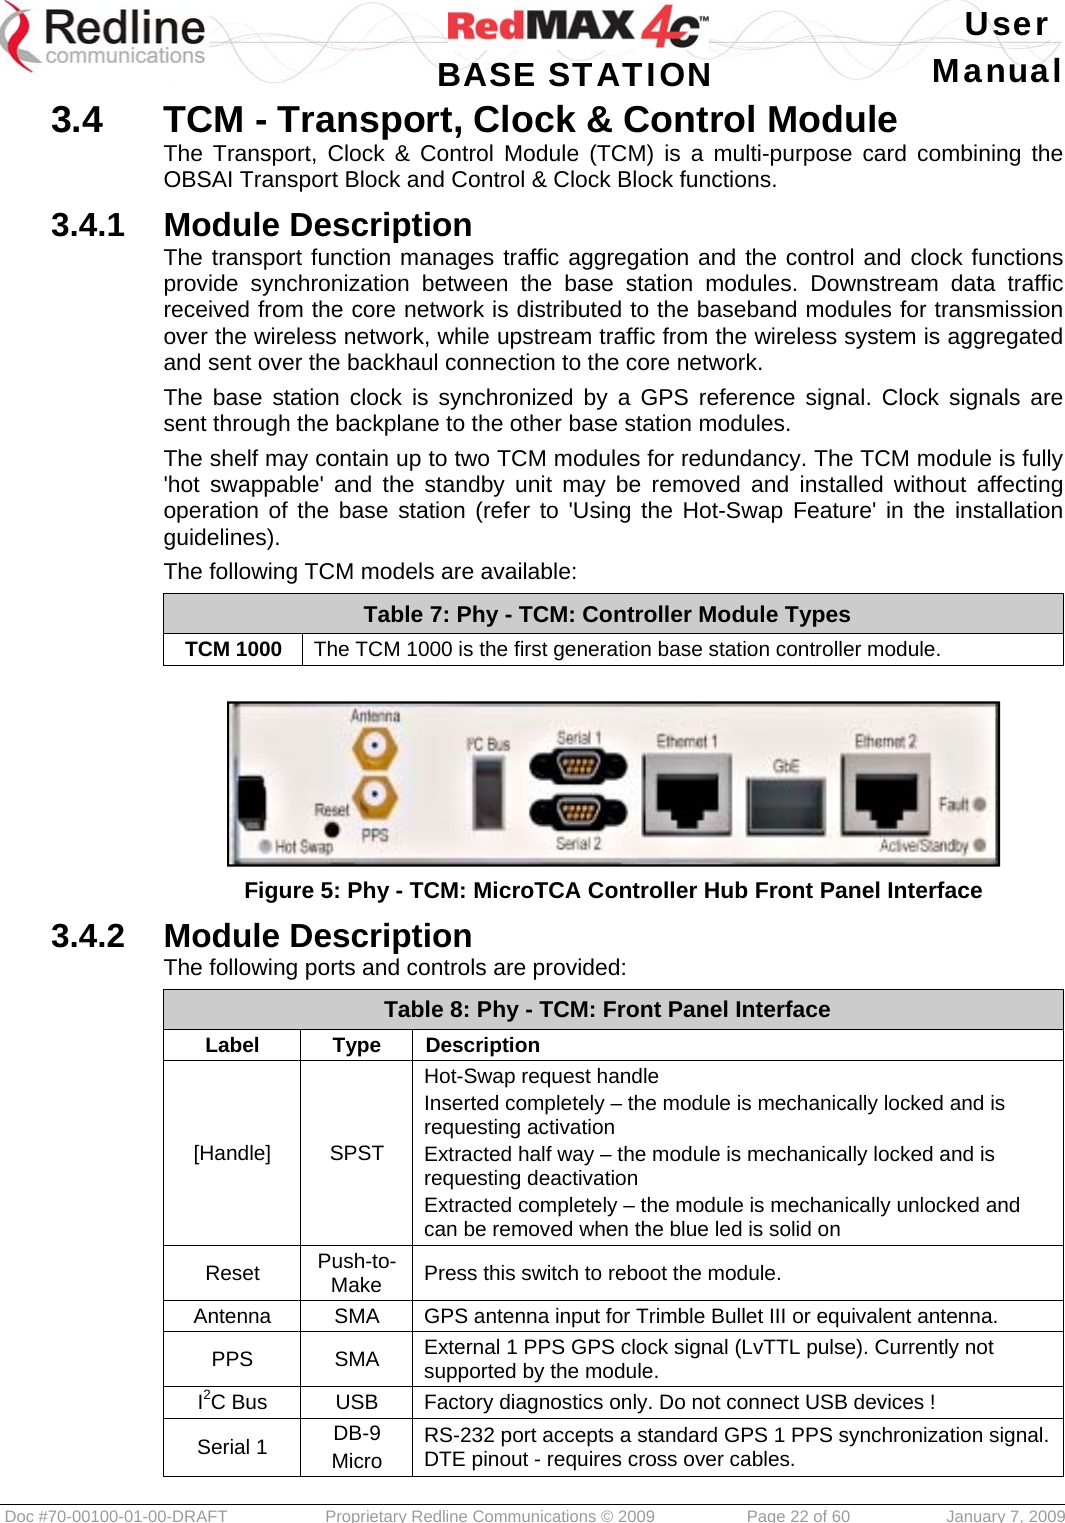   User  BASE STATION Manual  Doc #70-00100-01-00-DRAFT  Proprietary Redline Communications © 2009   Page 22 of 60  January 7, 2009 3.4  TCM - Transport, Clock &amp; Control Module The Transport, Clock &amp; Control Module (TCM) is a multi-purpose card combining the OBSAI Transport Block and Control &amp; Clock Block functions. 3.4.1  Module Description The transport function manages traffic aggregation and the control and clock functions provide synchronization between the base station modules. Downstream data traffic received from the core network is distributed to the baseband modules for transmission over the wireless network, while upstream traffic from the wireless system is aggregated and sent over the backhaul connection to the core network. The base station clock is synchronized by a GPS reference signal. Clock signals are sent through the backplane to the other base station modules. The shelf may contain up to two TCM modules for redundancy. The TCM module is fully &apos;hot swappable&apos; and the standby unit may be removed and installed without affecting operation of the base station (refer to &apos;Using the Hot-Swap Feature&apos; in the installation guidelines). The following TCM models are available: Table 7: Phy - TCM: Controller Module Types TCM 1000  The TCM 1000 is the first generation base station controller module.   Figure 5: Phy - TCM: MicroTCA Controller Hub Front Panel Interface 3.4.2  Module Description The following ports and controls are provided: Table 8: Phy - TCM: Front Panel Interface Label Type Description [Handle] SPST Hot-Swap request handle Inserted completely – the module is mechanically locked and is requesting activation Extracted half way – the module is mechanically locked and is requesting deactivation Extracted completely – the module is mechanically unlocked and can be removed when the blue led is solid on Reset  Push-to-Make  Press this switch to reboot the module. Antenna  SMA  GPS antenna input for Trimble Bullet III or equivalent antenna. PPS SMA External 1 PPS GPS clock signal (LvTTL pulse). Currently not supported by the module. I2C Bus  USB  Factory diagnostics only. Do not connect USB devices ! Serial 1  DB-9 Micro RS-232 port accepts a standard GPS 1 PPS synchronization signal. DTE pinout - requires cross over cables. 